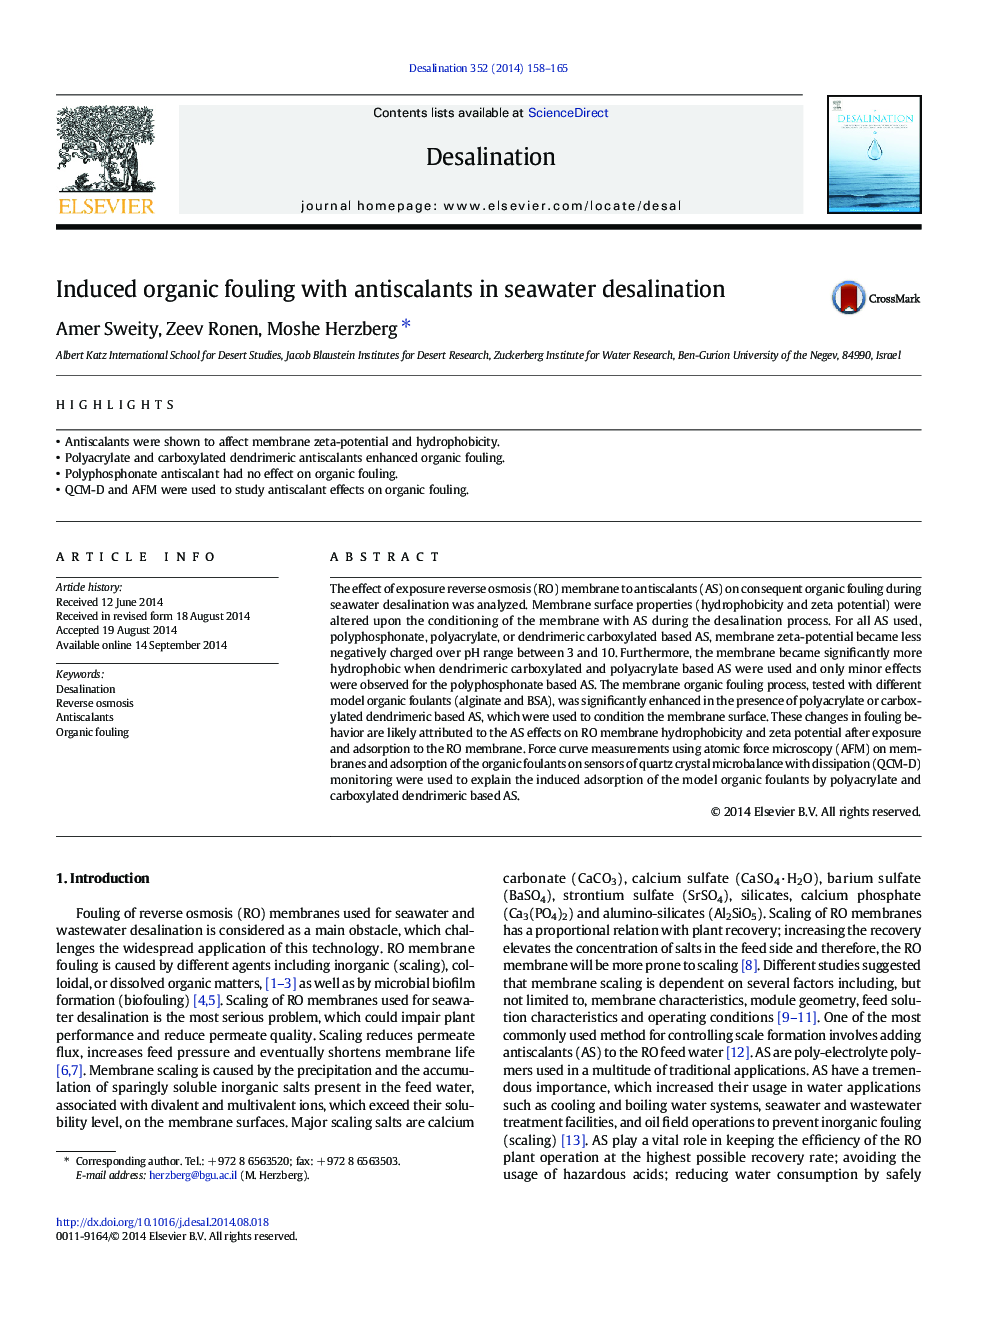 Induced organic fouling with antiscalants in seawater desalination